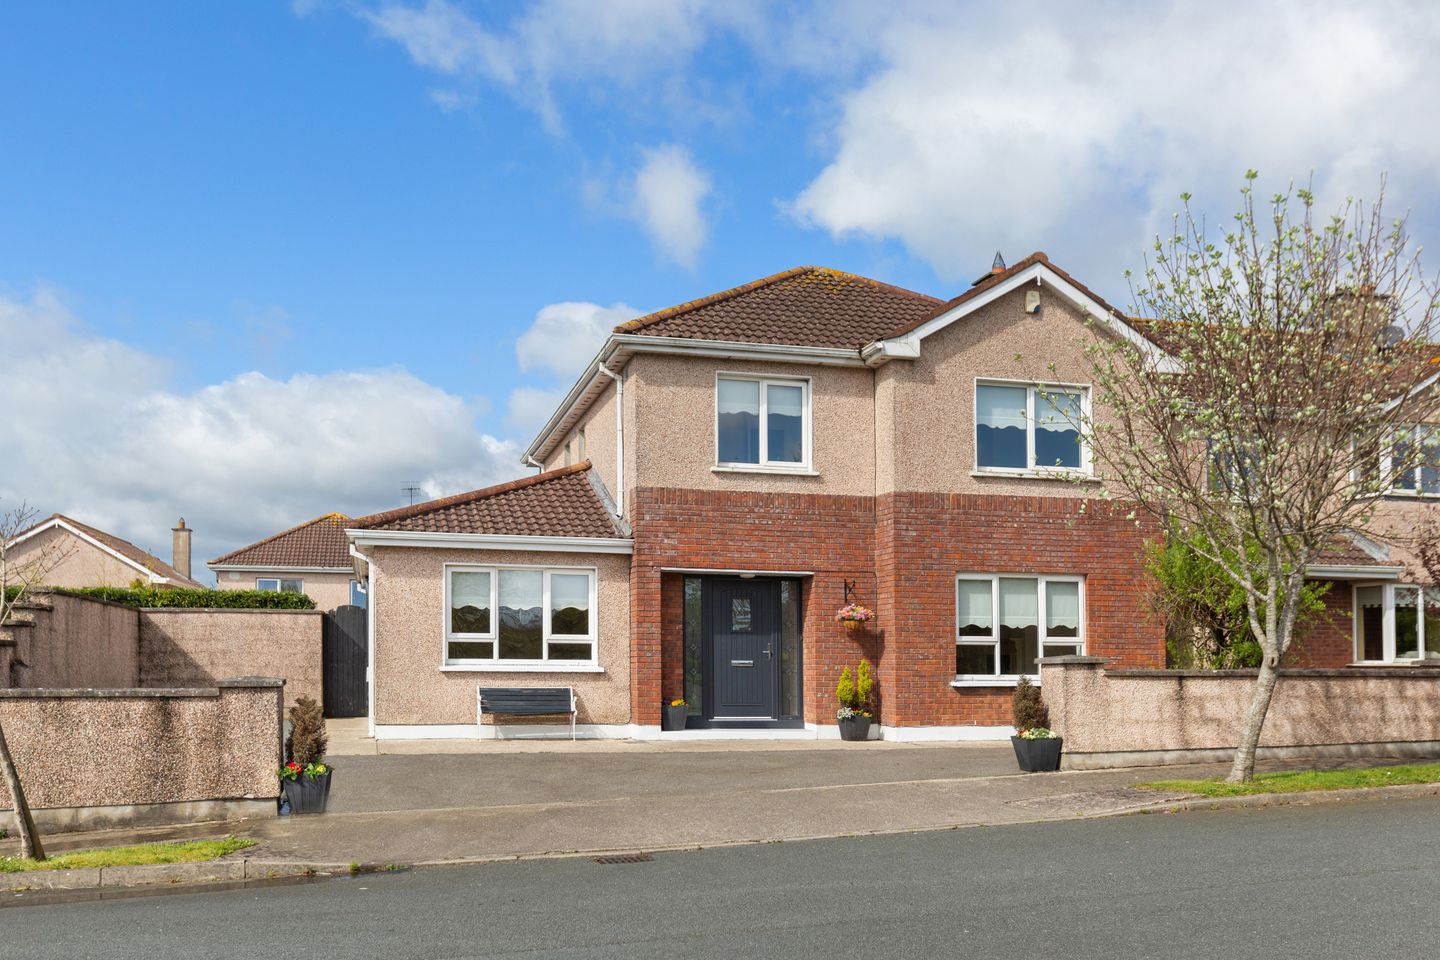 159 Knockmore, Arklow, Co Wicklow, Y14DR74